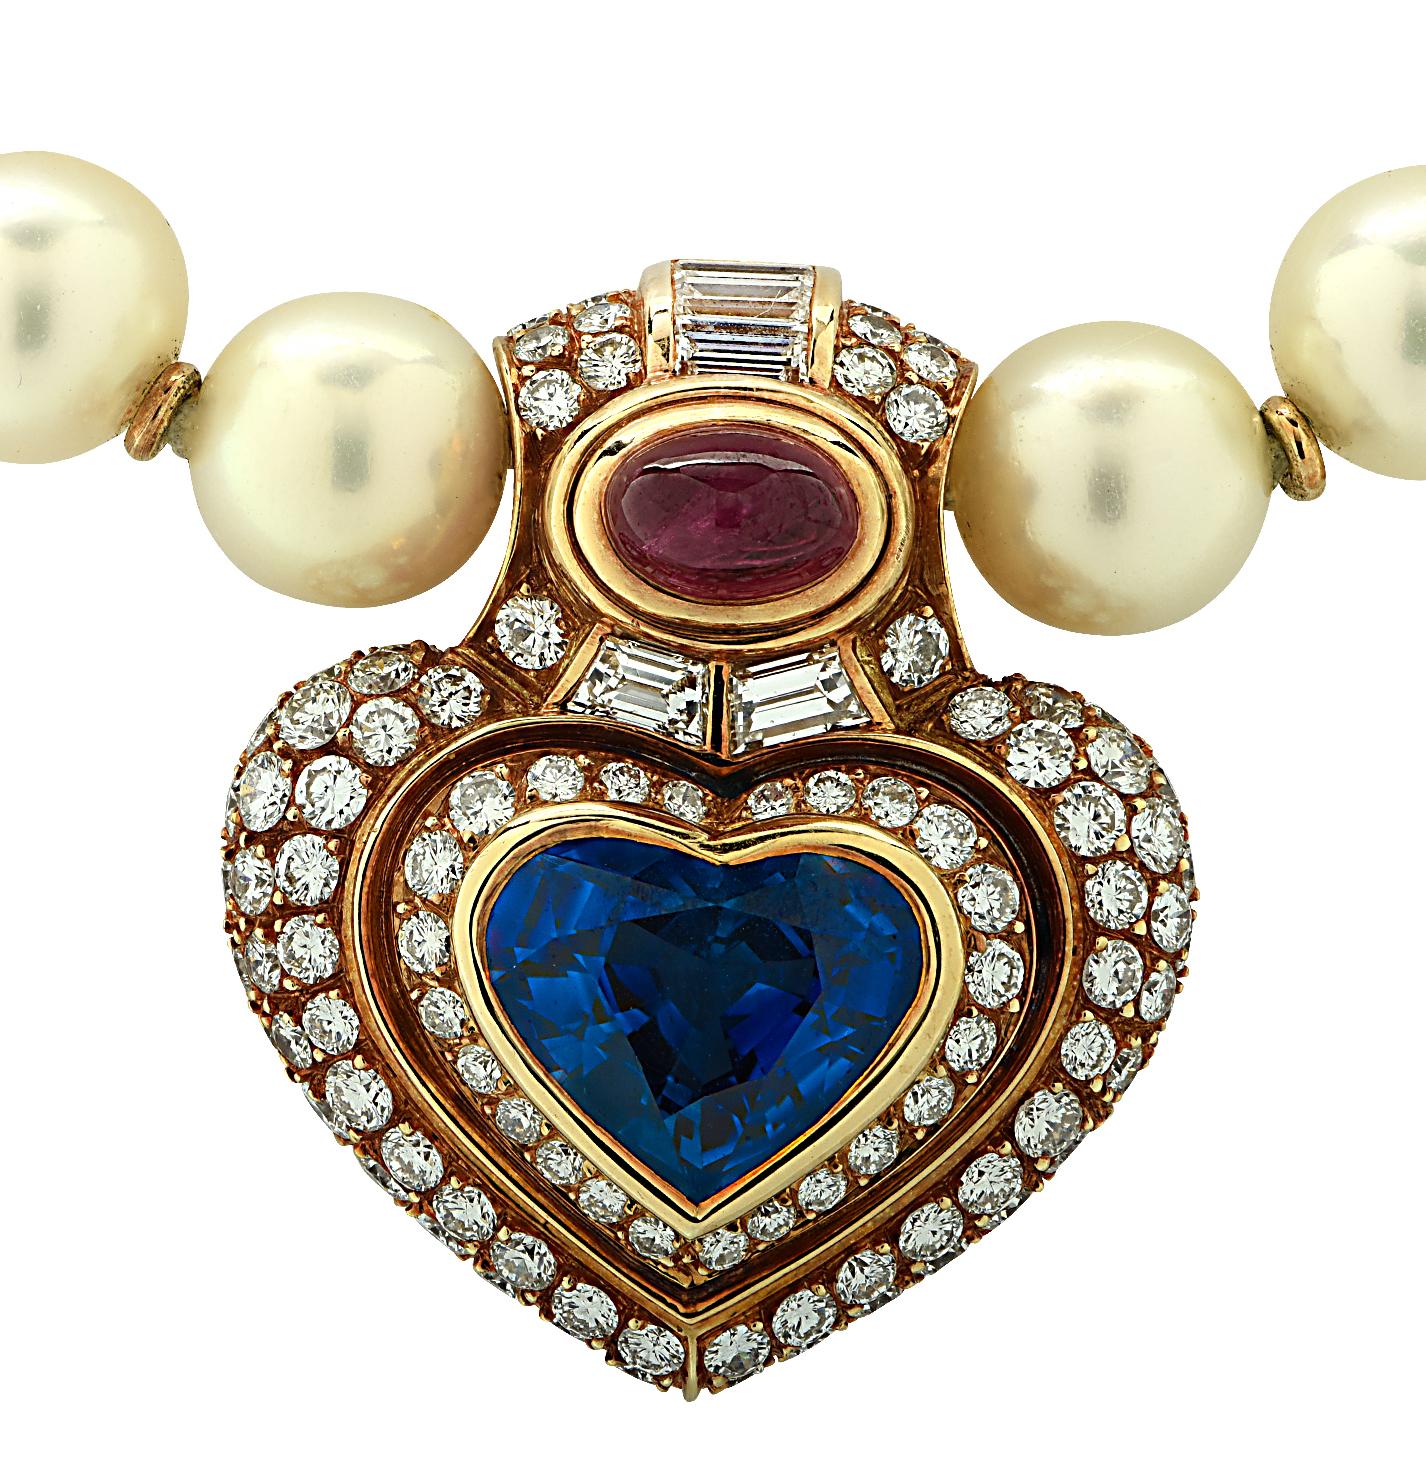 Sensational Bvlgari pearl, sapphire, ruby and diamond necklace circa 1990, crafted in 18 karat yellow gold, showcasing an AGL certified heart shaped blue Ceylon Sapphire weighing approximately 6.83 carats, an oval ruby cabochon weighing